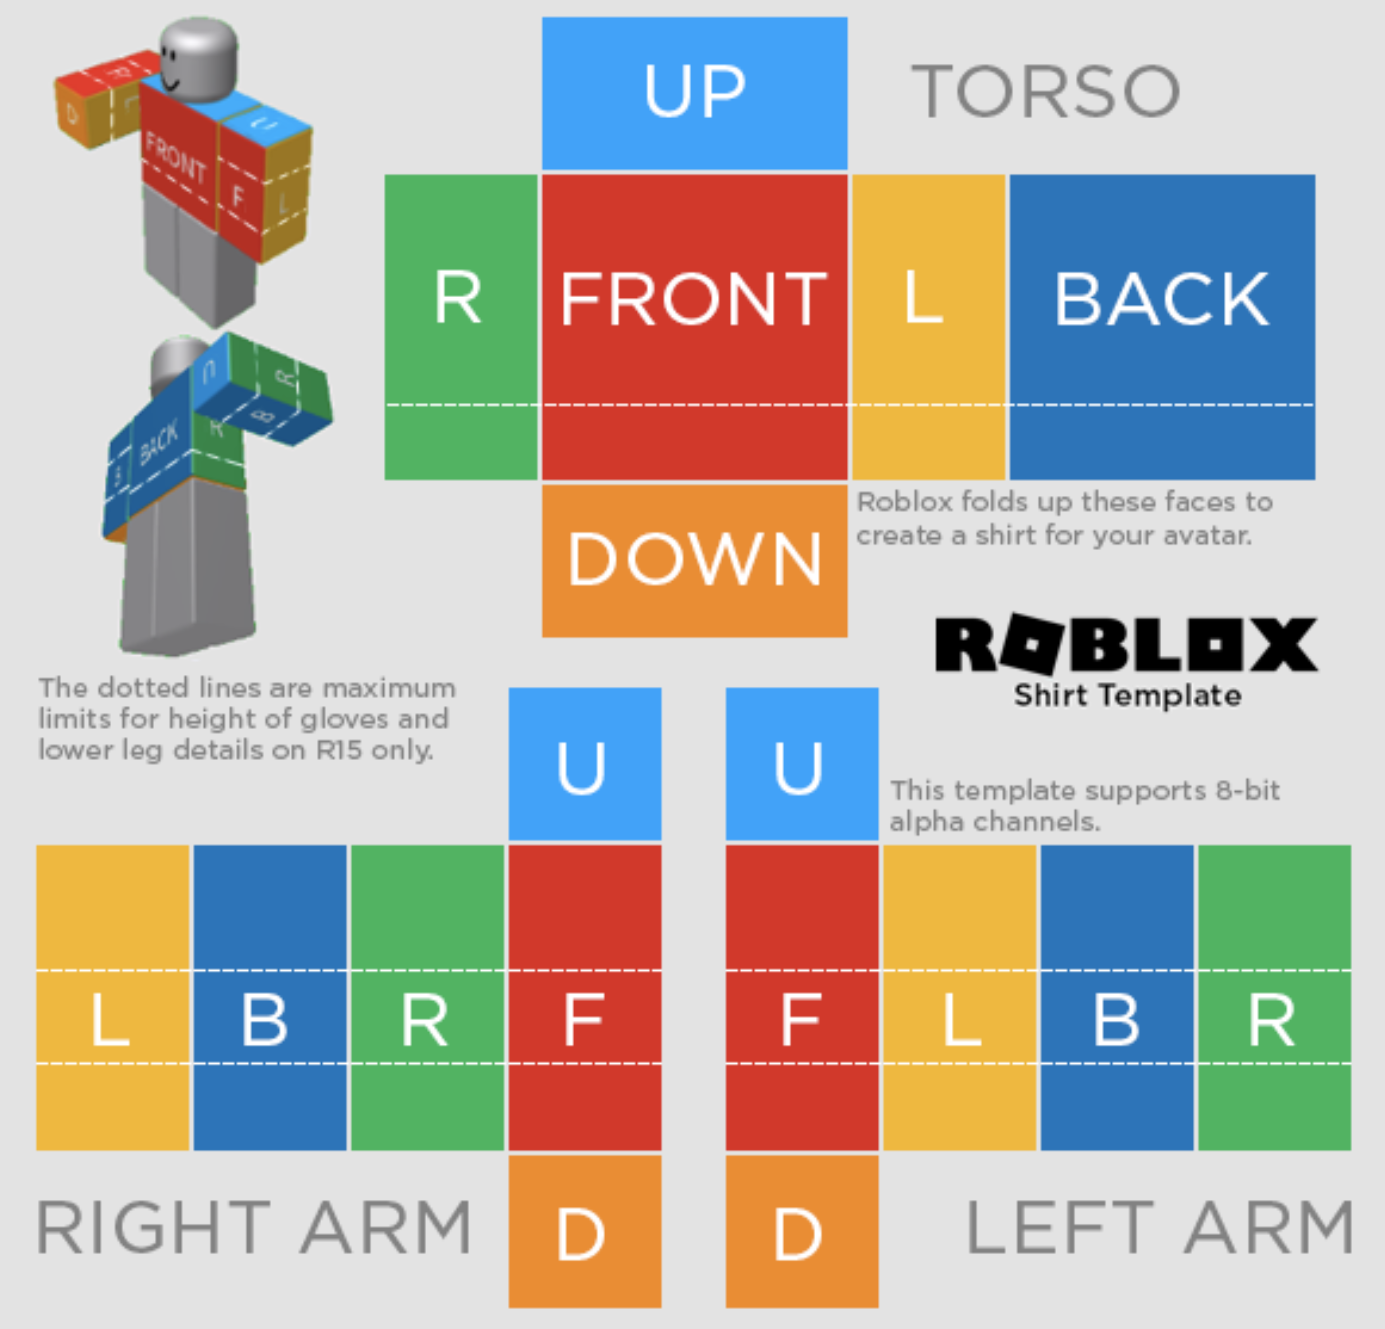 Colorful template for Roblox Avatar Clothing creation